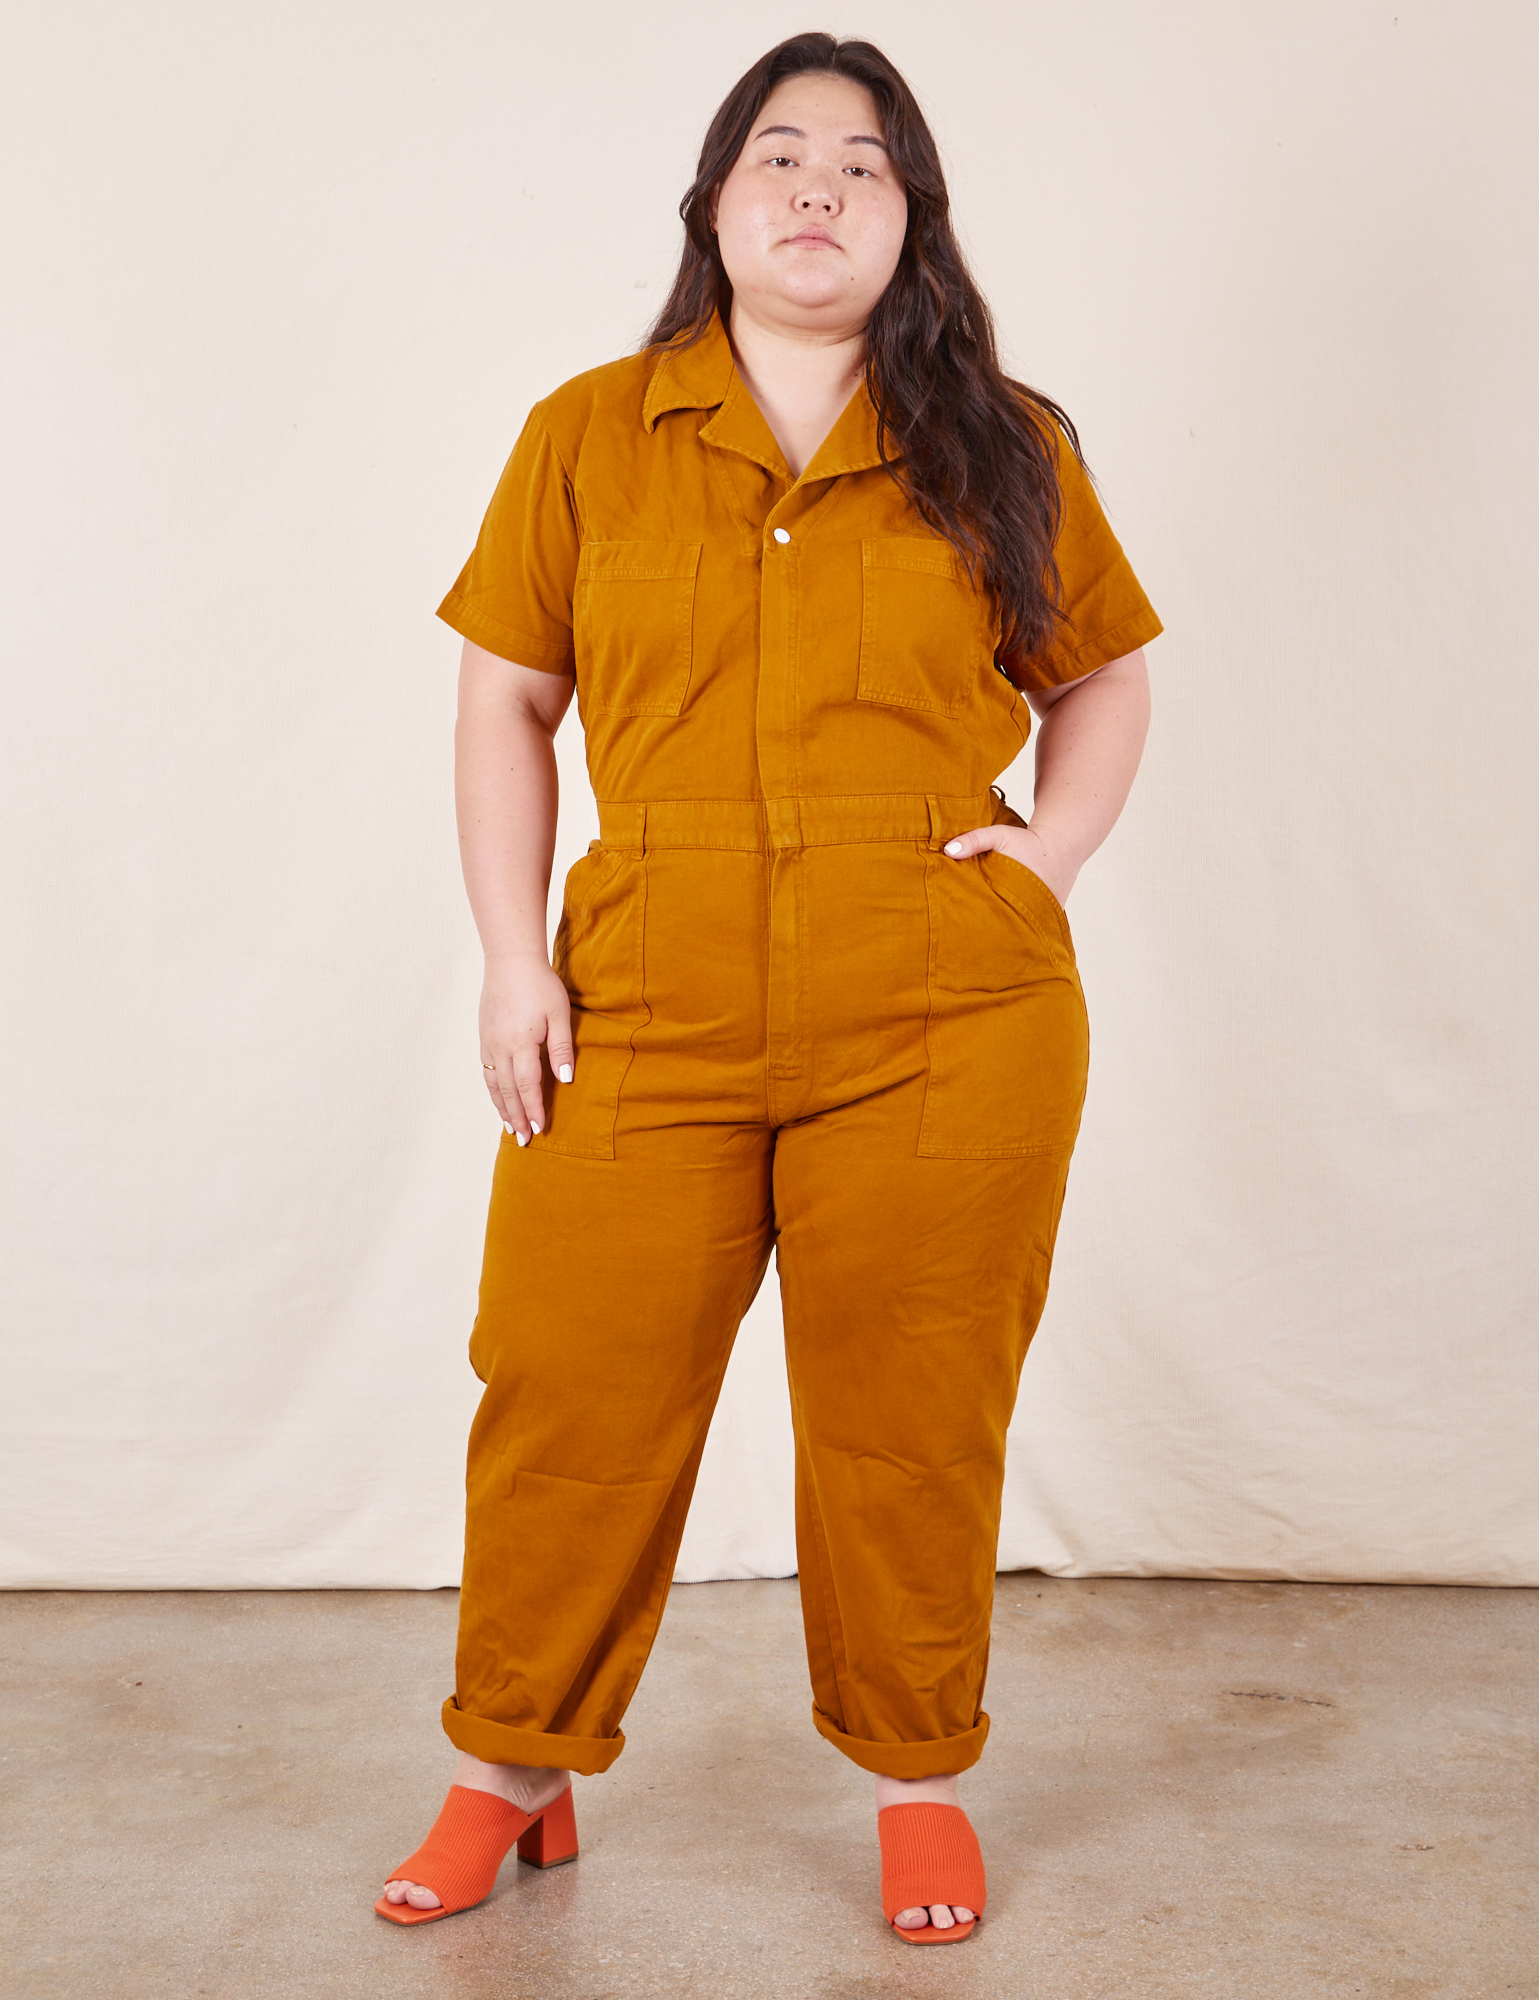 Ashley is 5&#39;7&quot; and wearing 1XL Short Sleeve Jumpsuit in Spicy Mustard